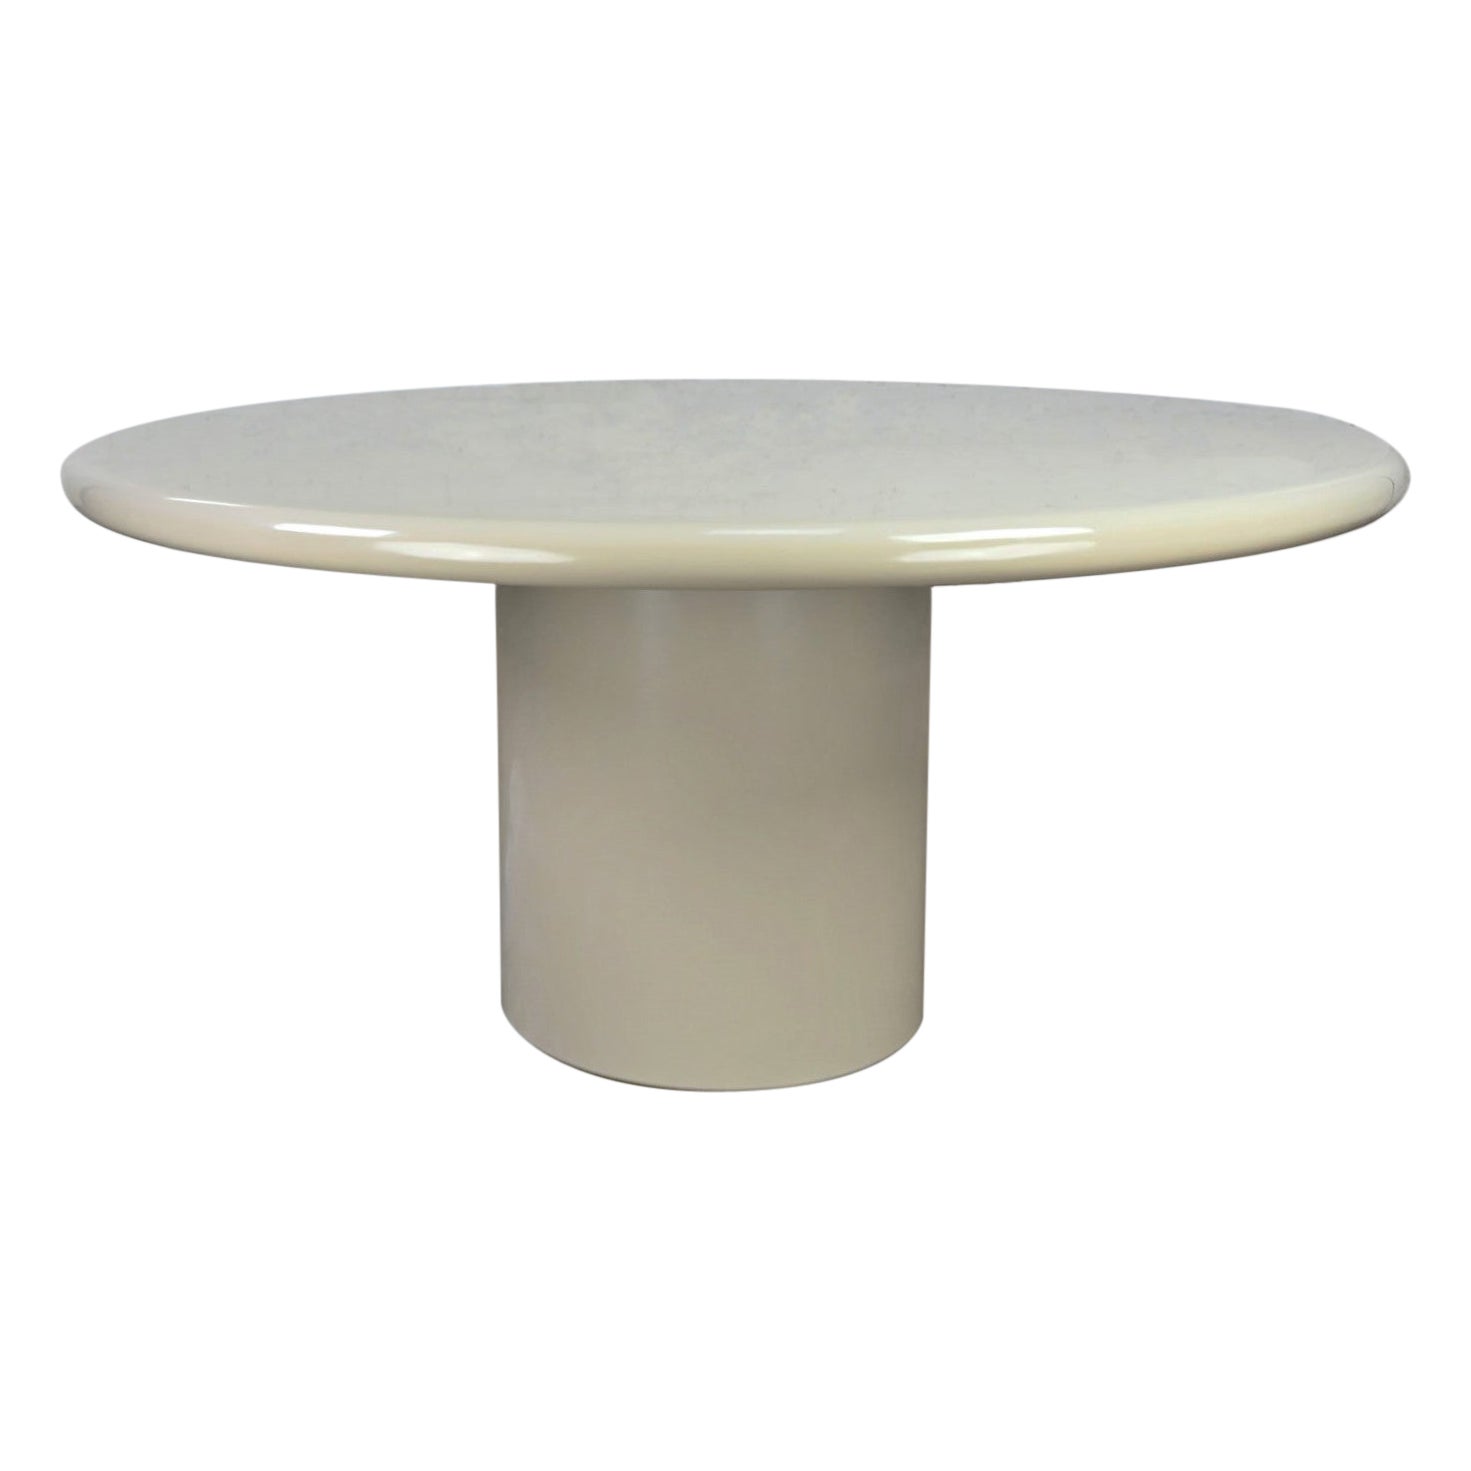 Round Postmodern Gray Lacquered Composite Dining Table Style Karl Springer